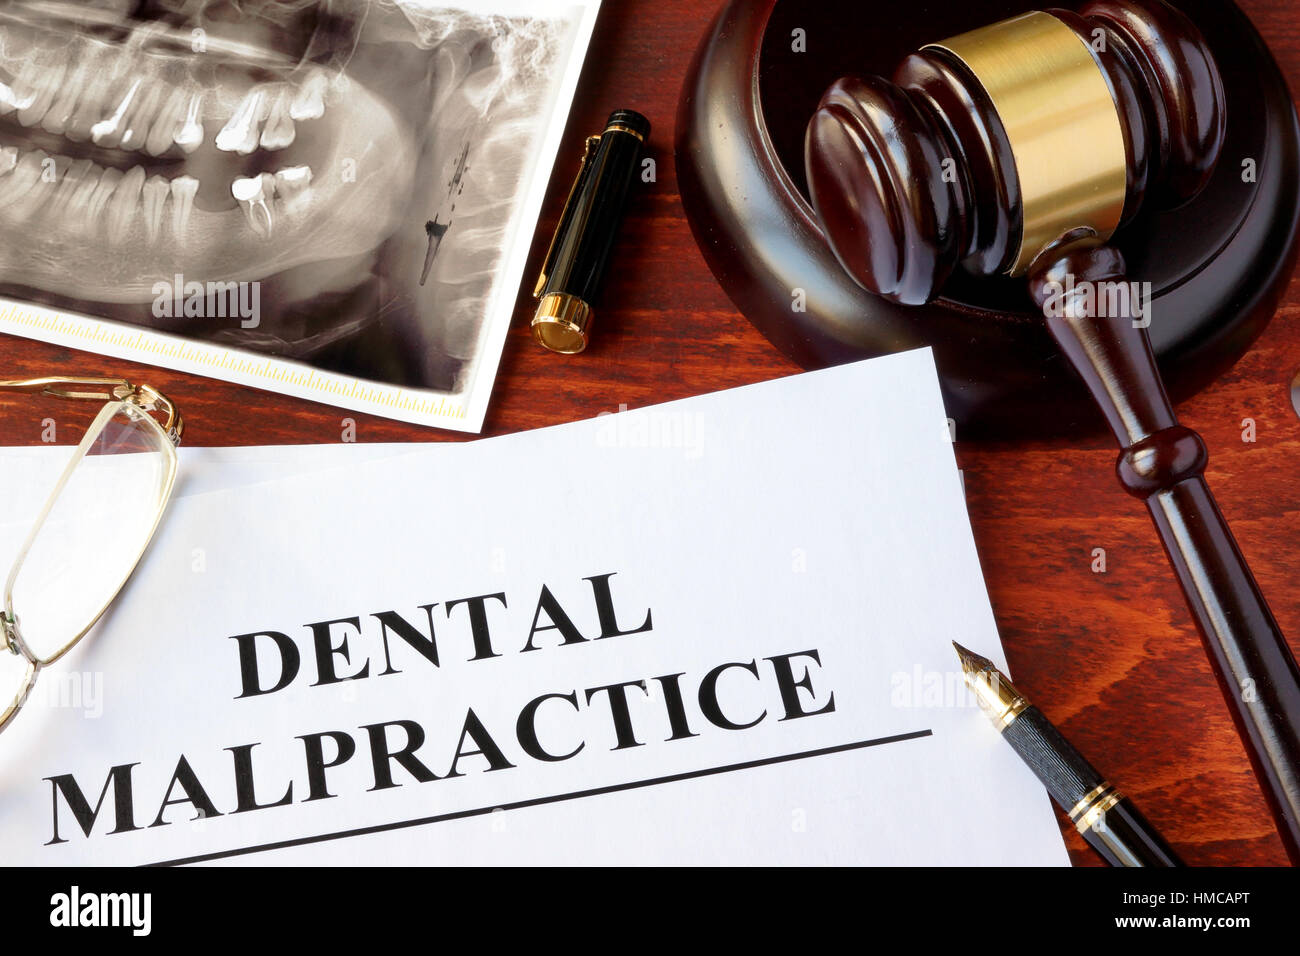 Dental Malpractice form, and gavel on a surface. Stock Photo